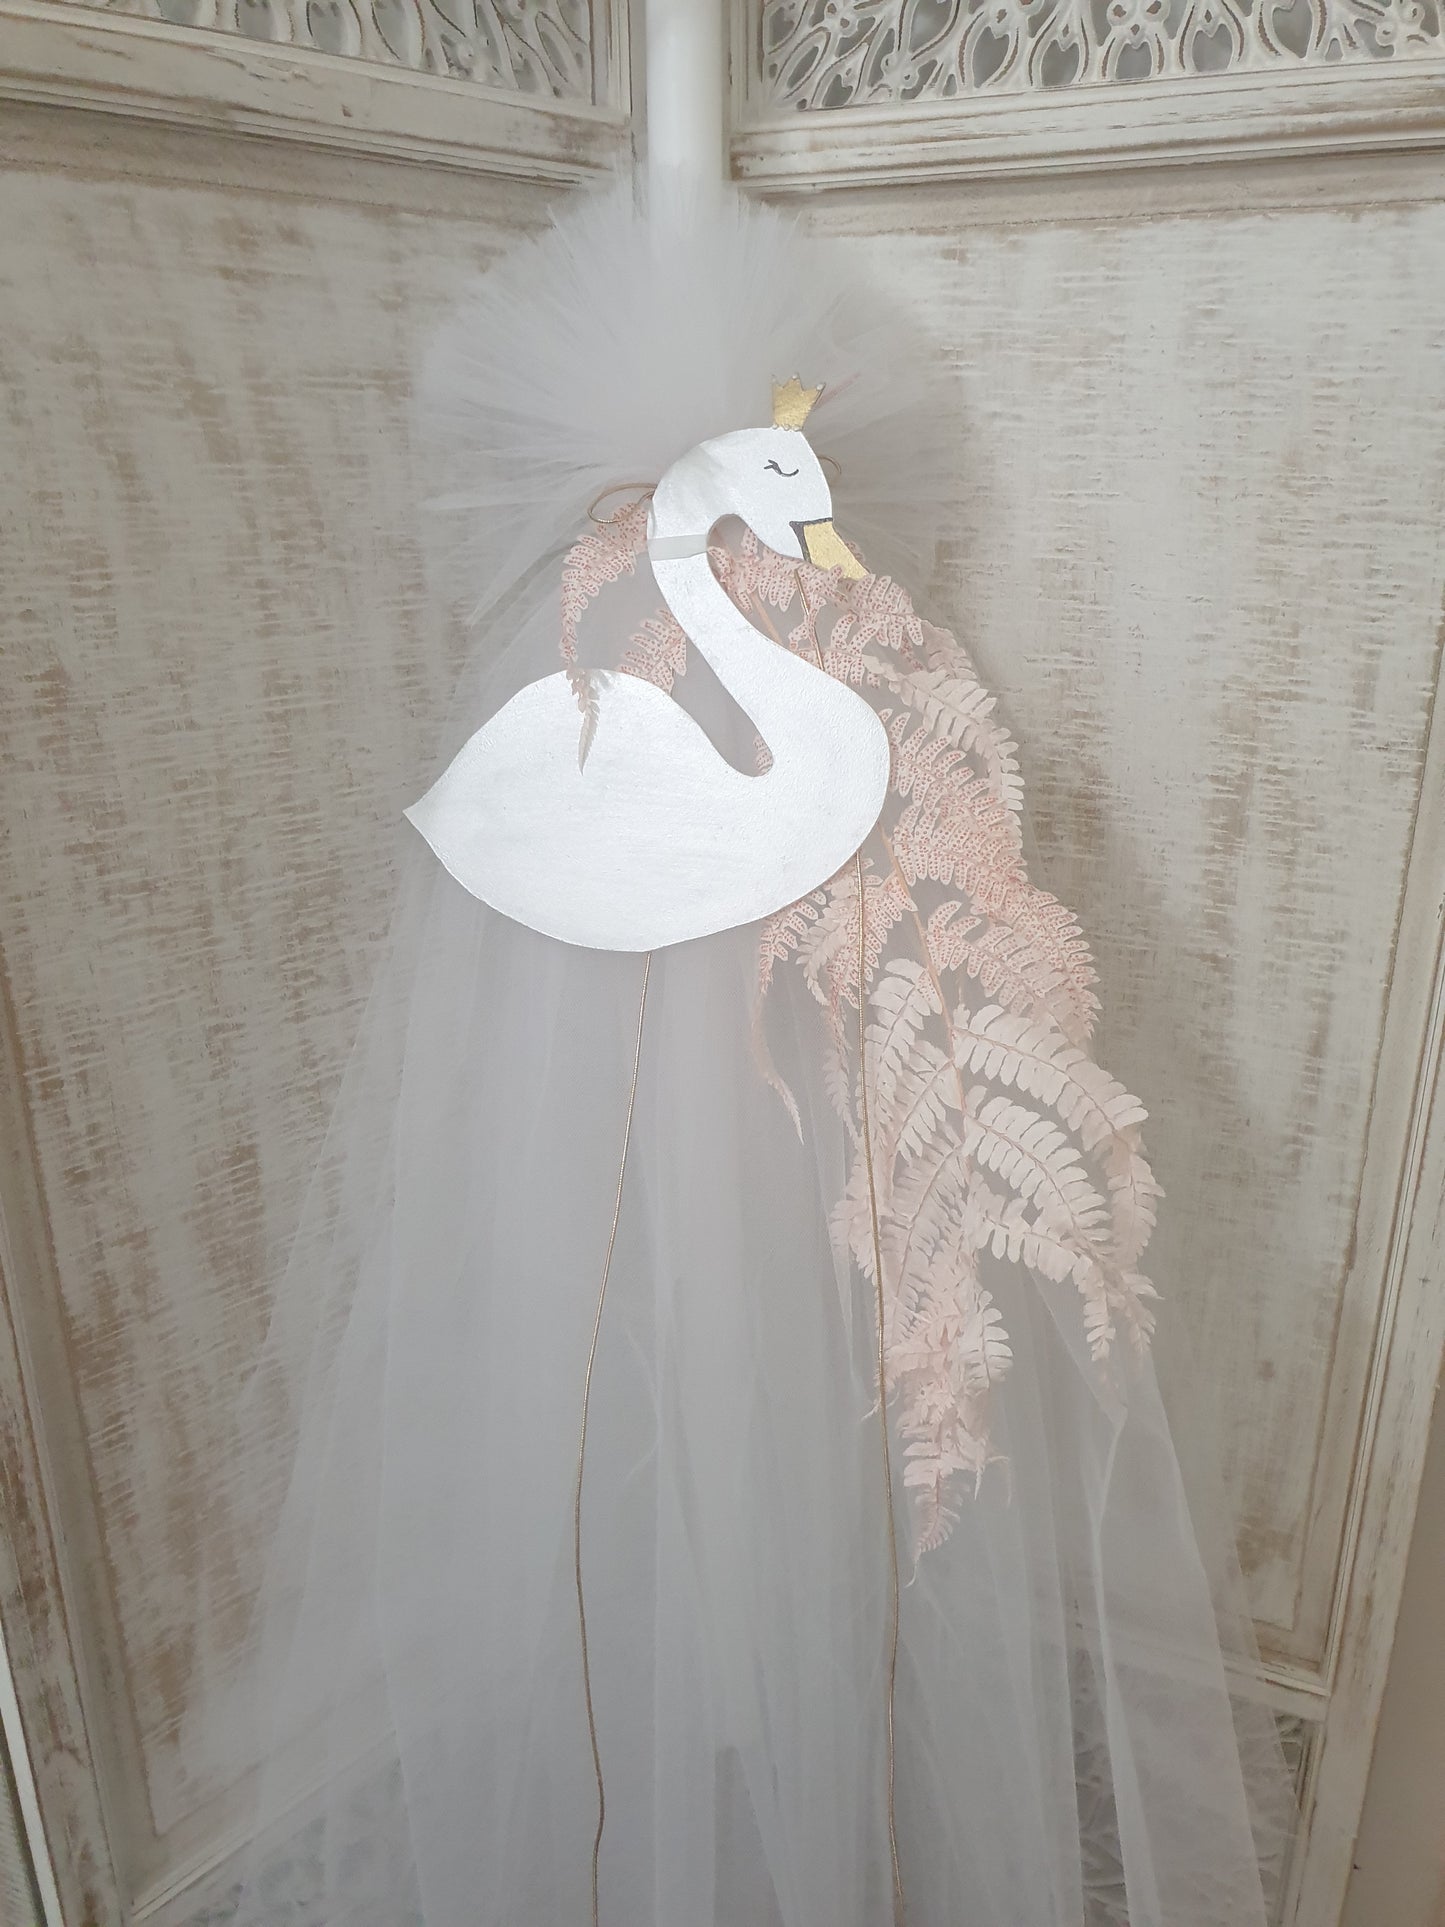 Orthodox Christening Candle - Swan with Pink Fern